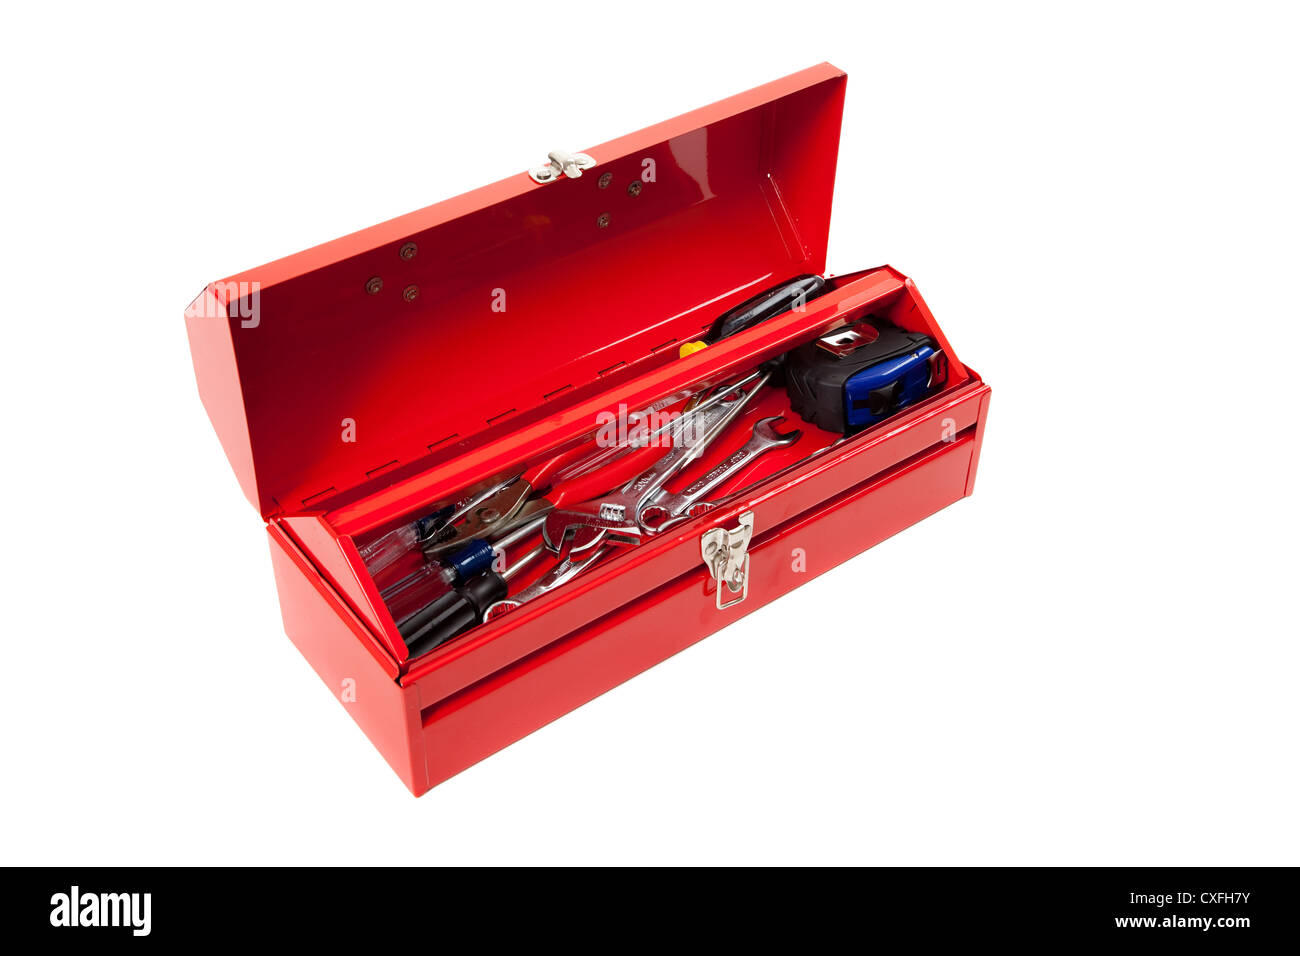 A red metal toolbox full of tools on a white background Stock Photo